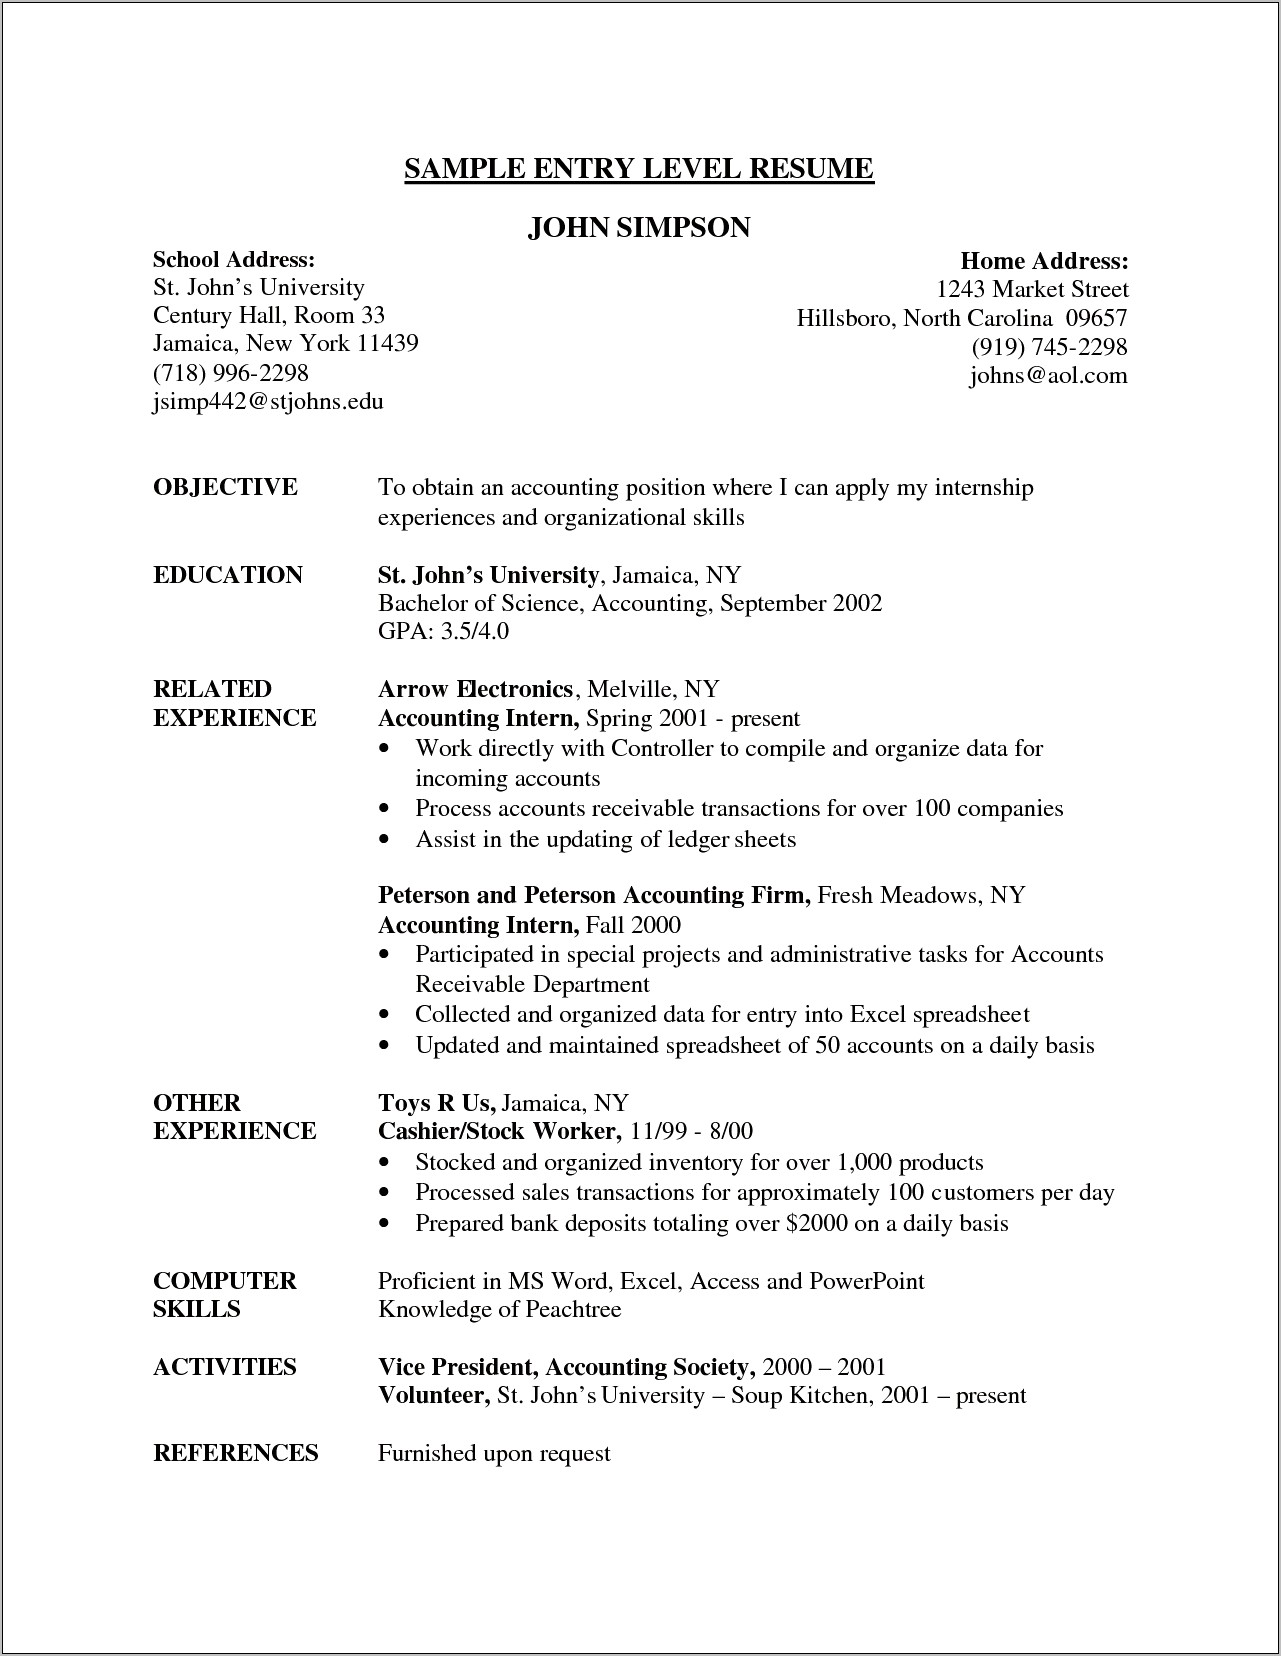 Example Of Resume For Job Application In Malaysia